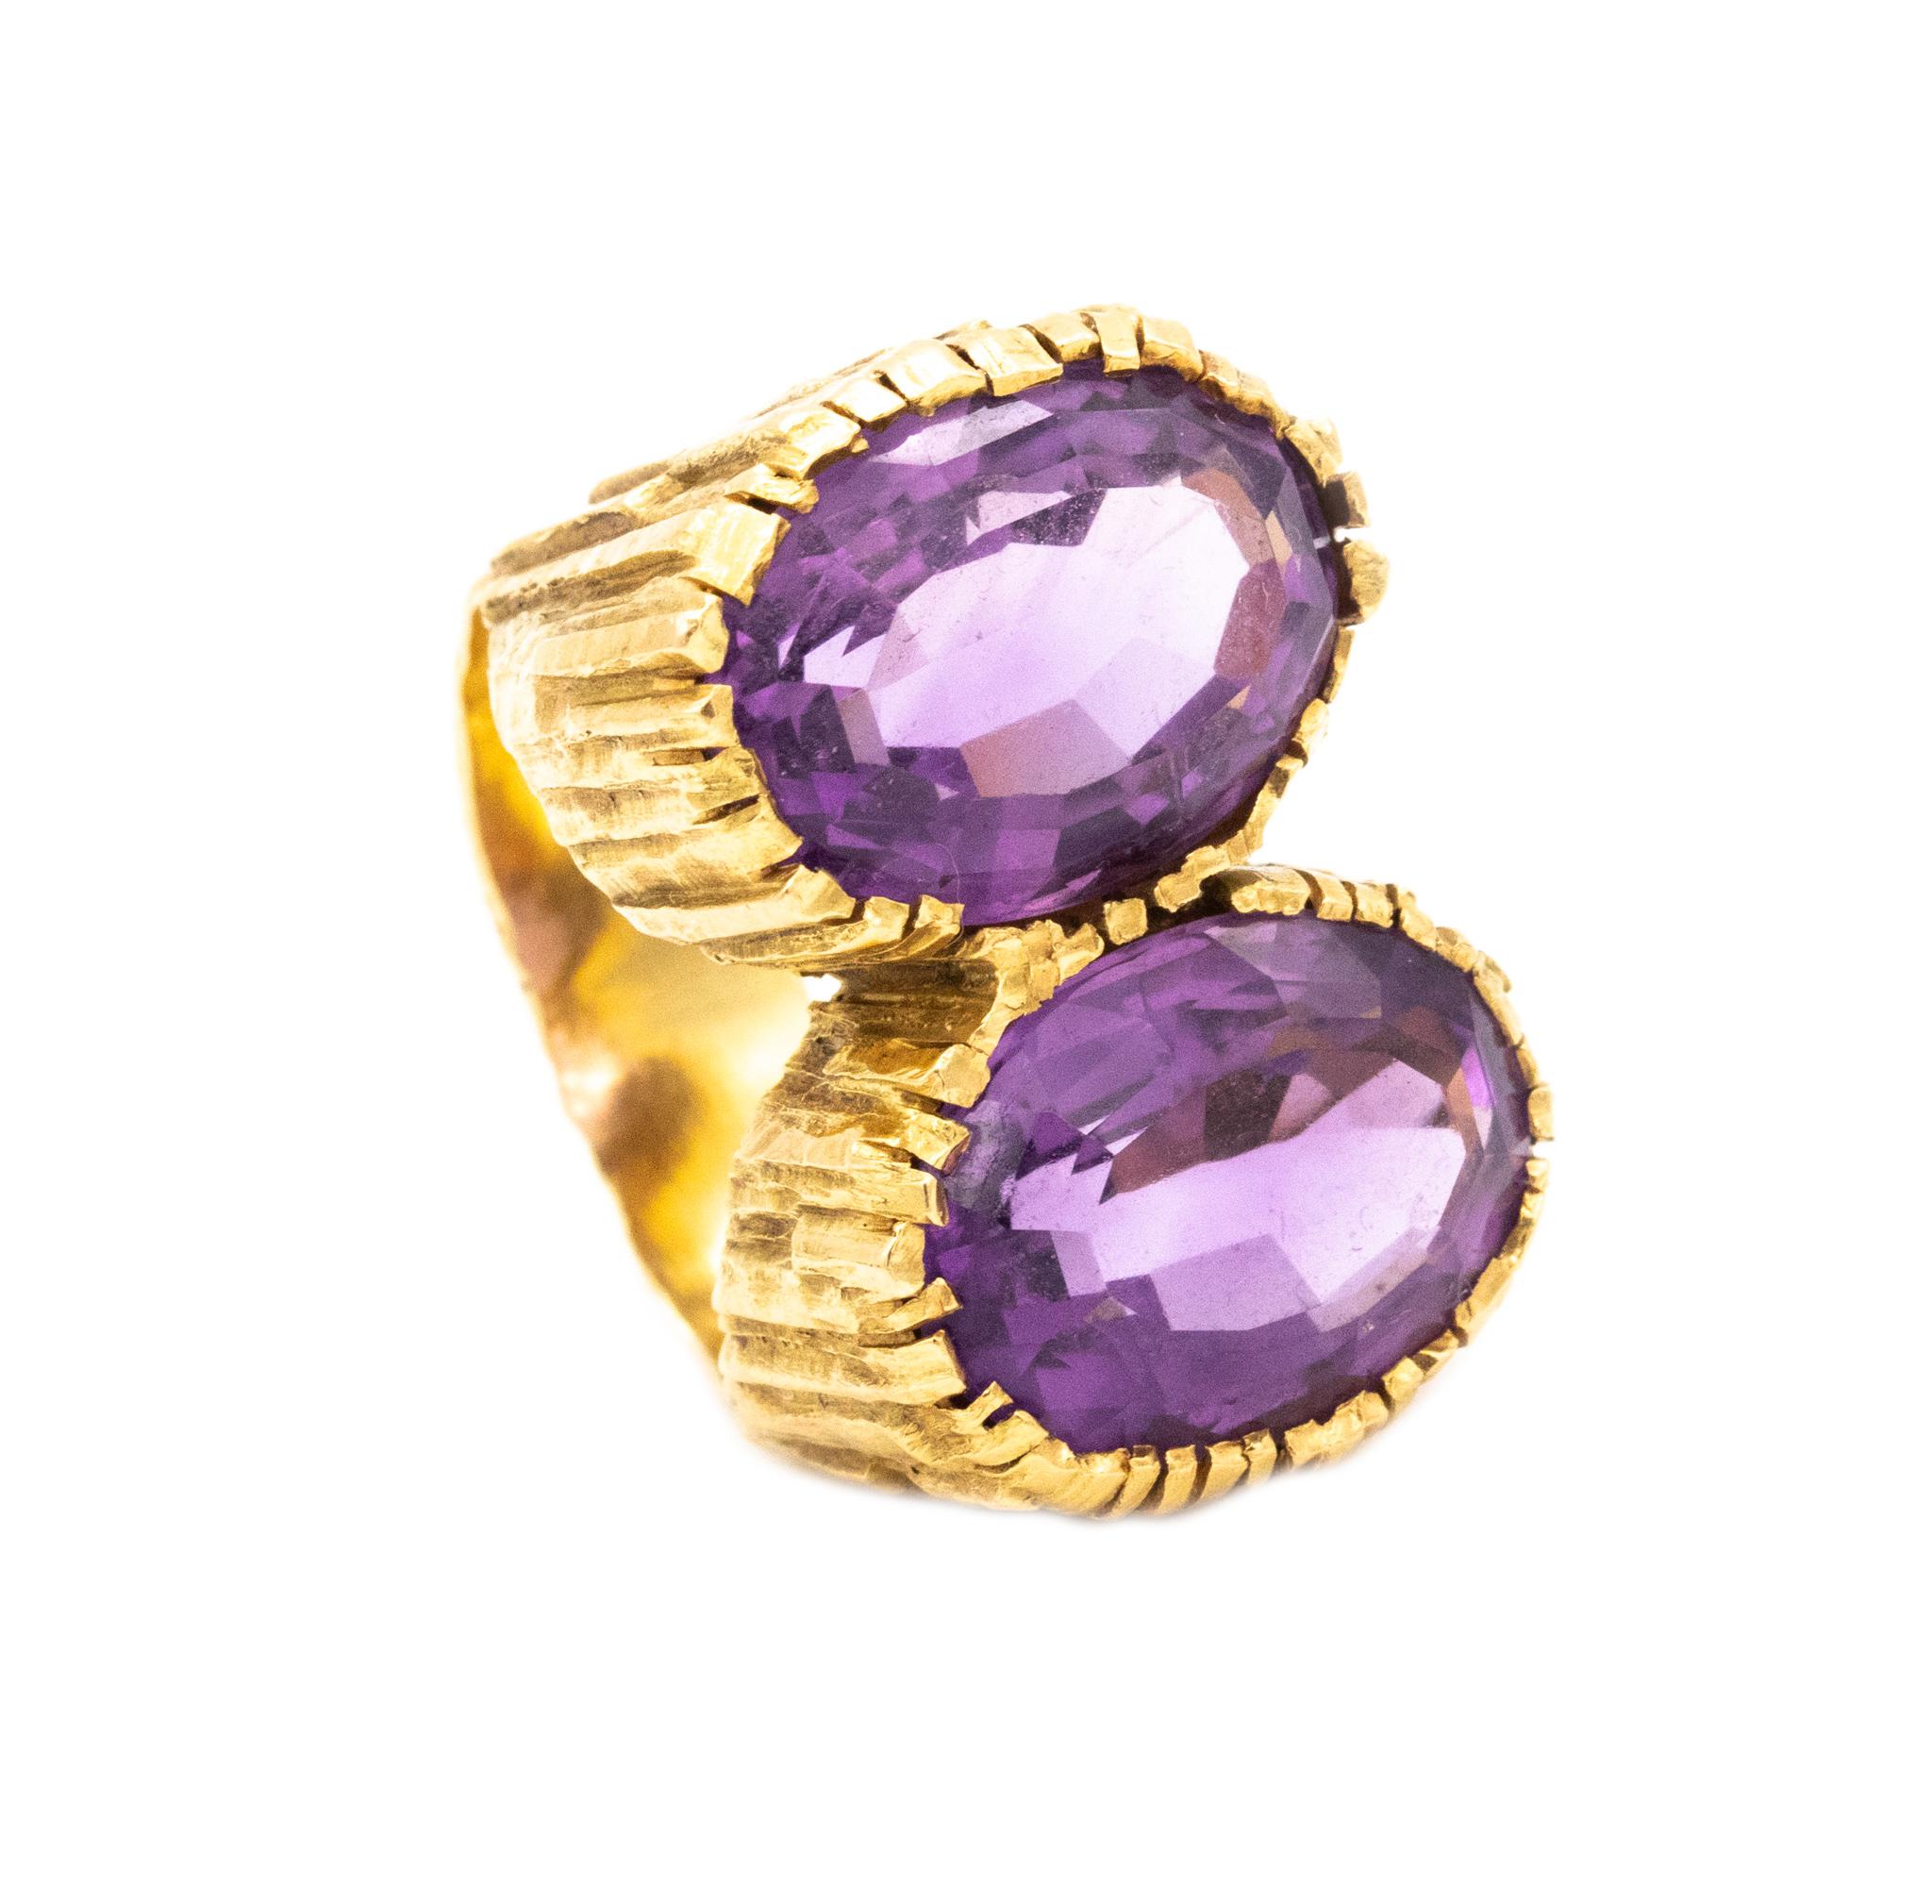 Oval Cut Tiffany Co. Andrew Grima 1972 London Cocktail Ring 18Kt with 16.45 Cts Amethyst